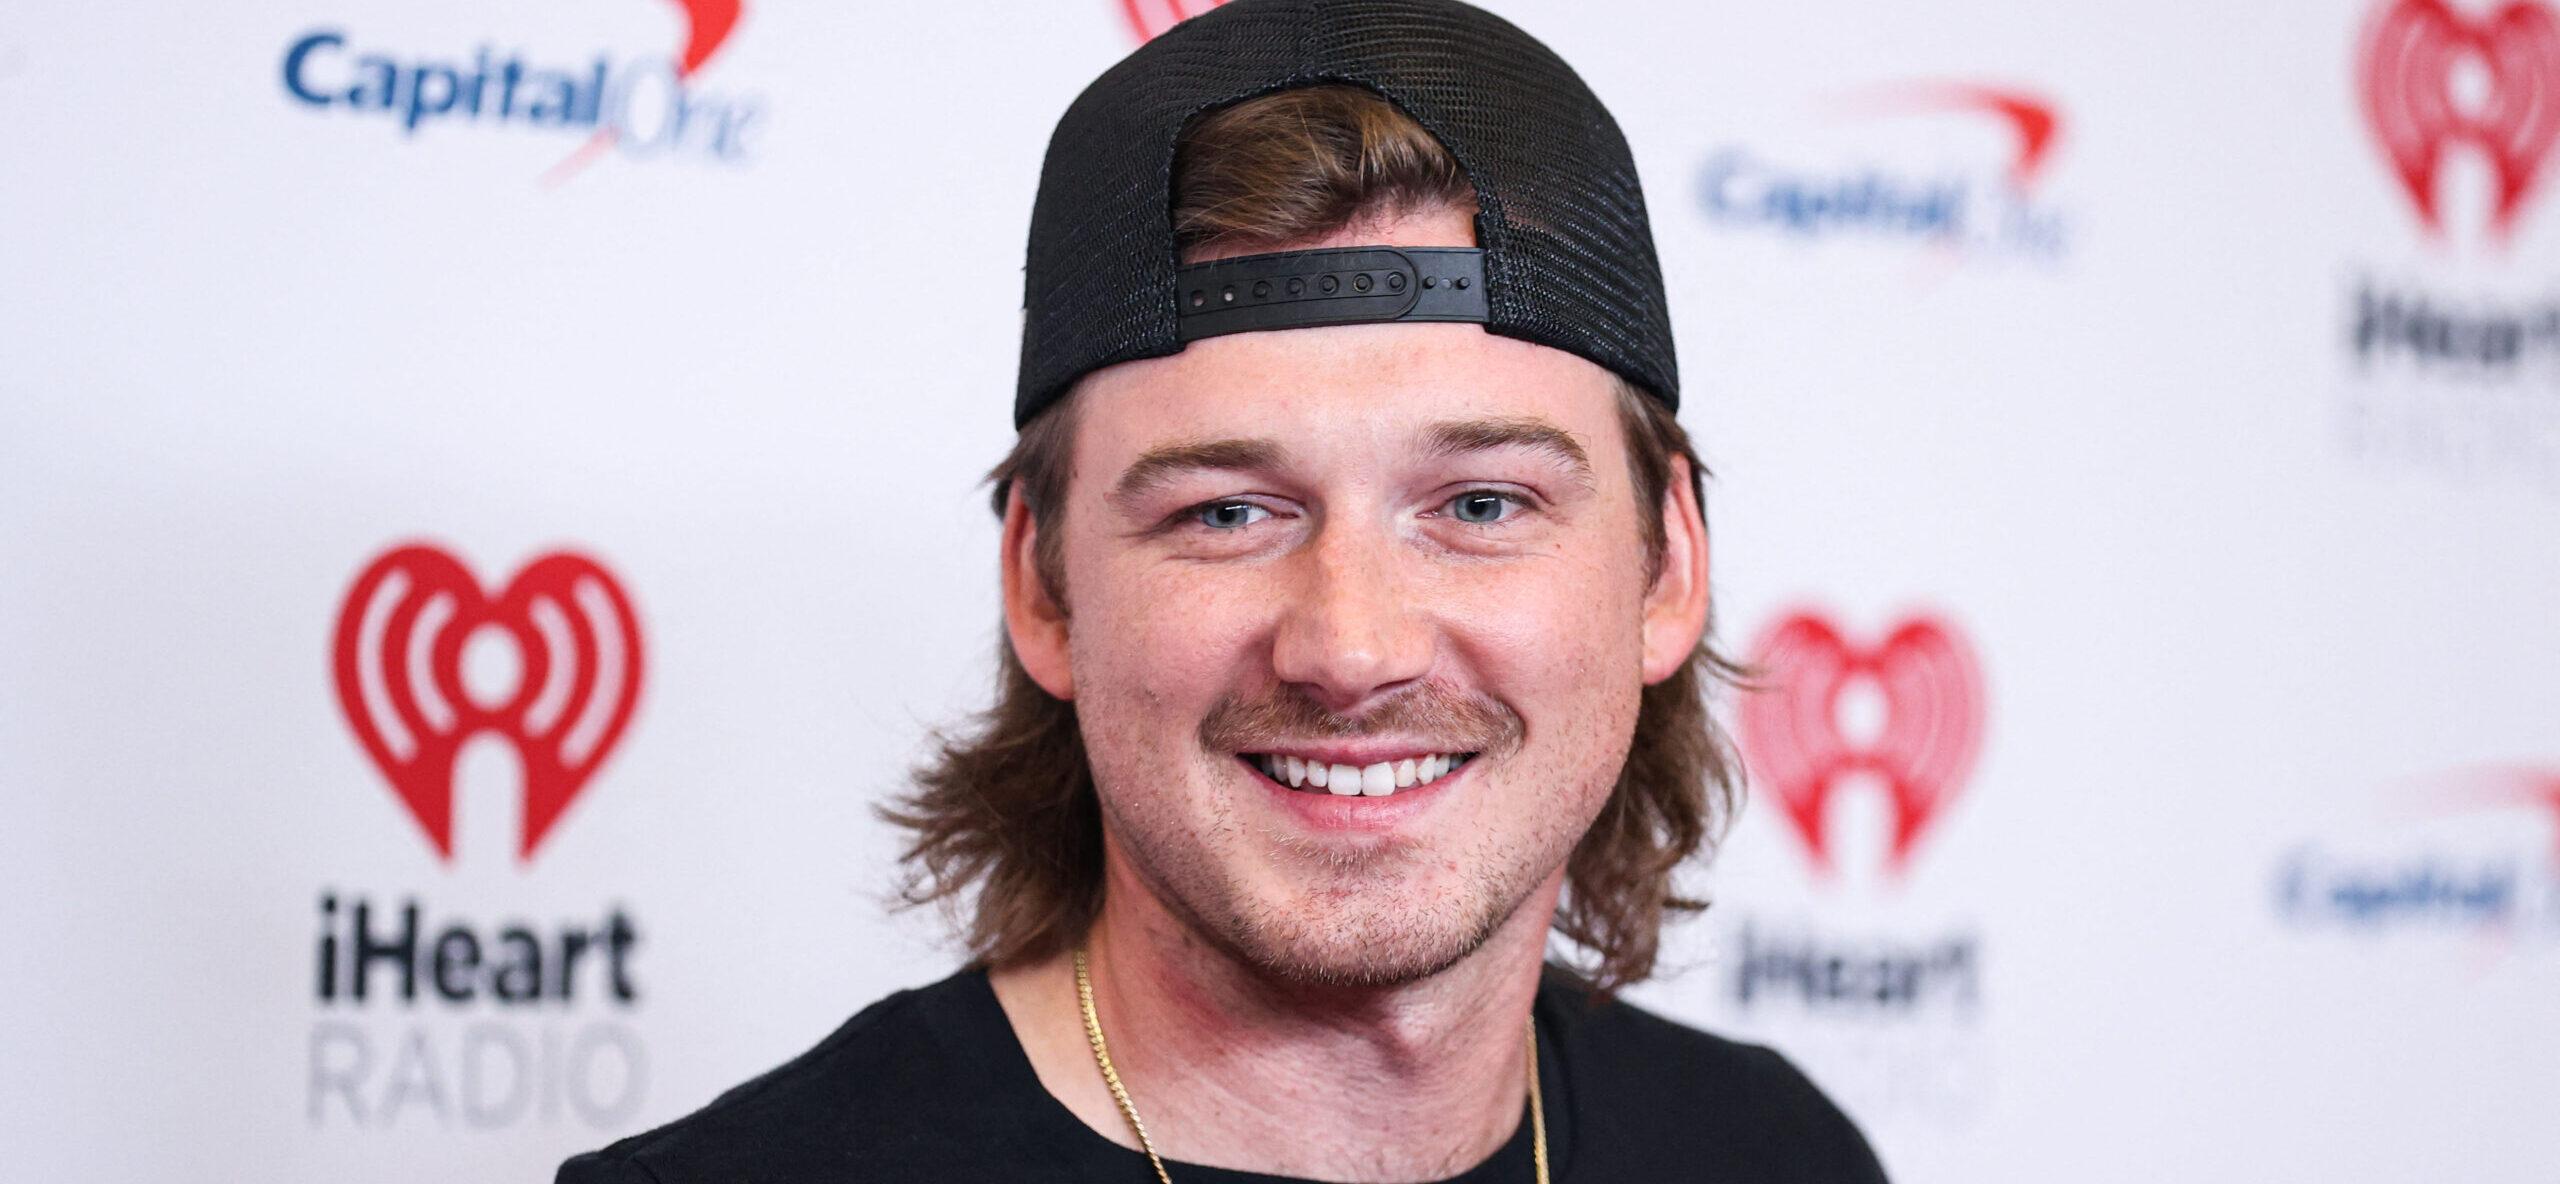 Morgan Wallen Allegedly Has A ‘Problem’ With Alcohol: ‘Doesn’t Know When To Stop’